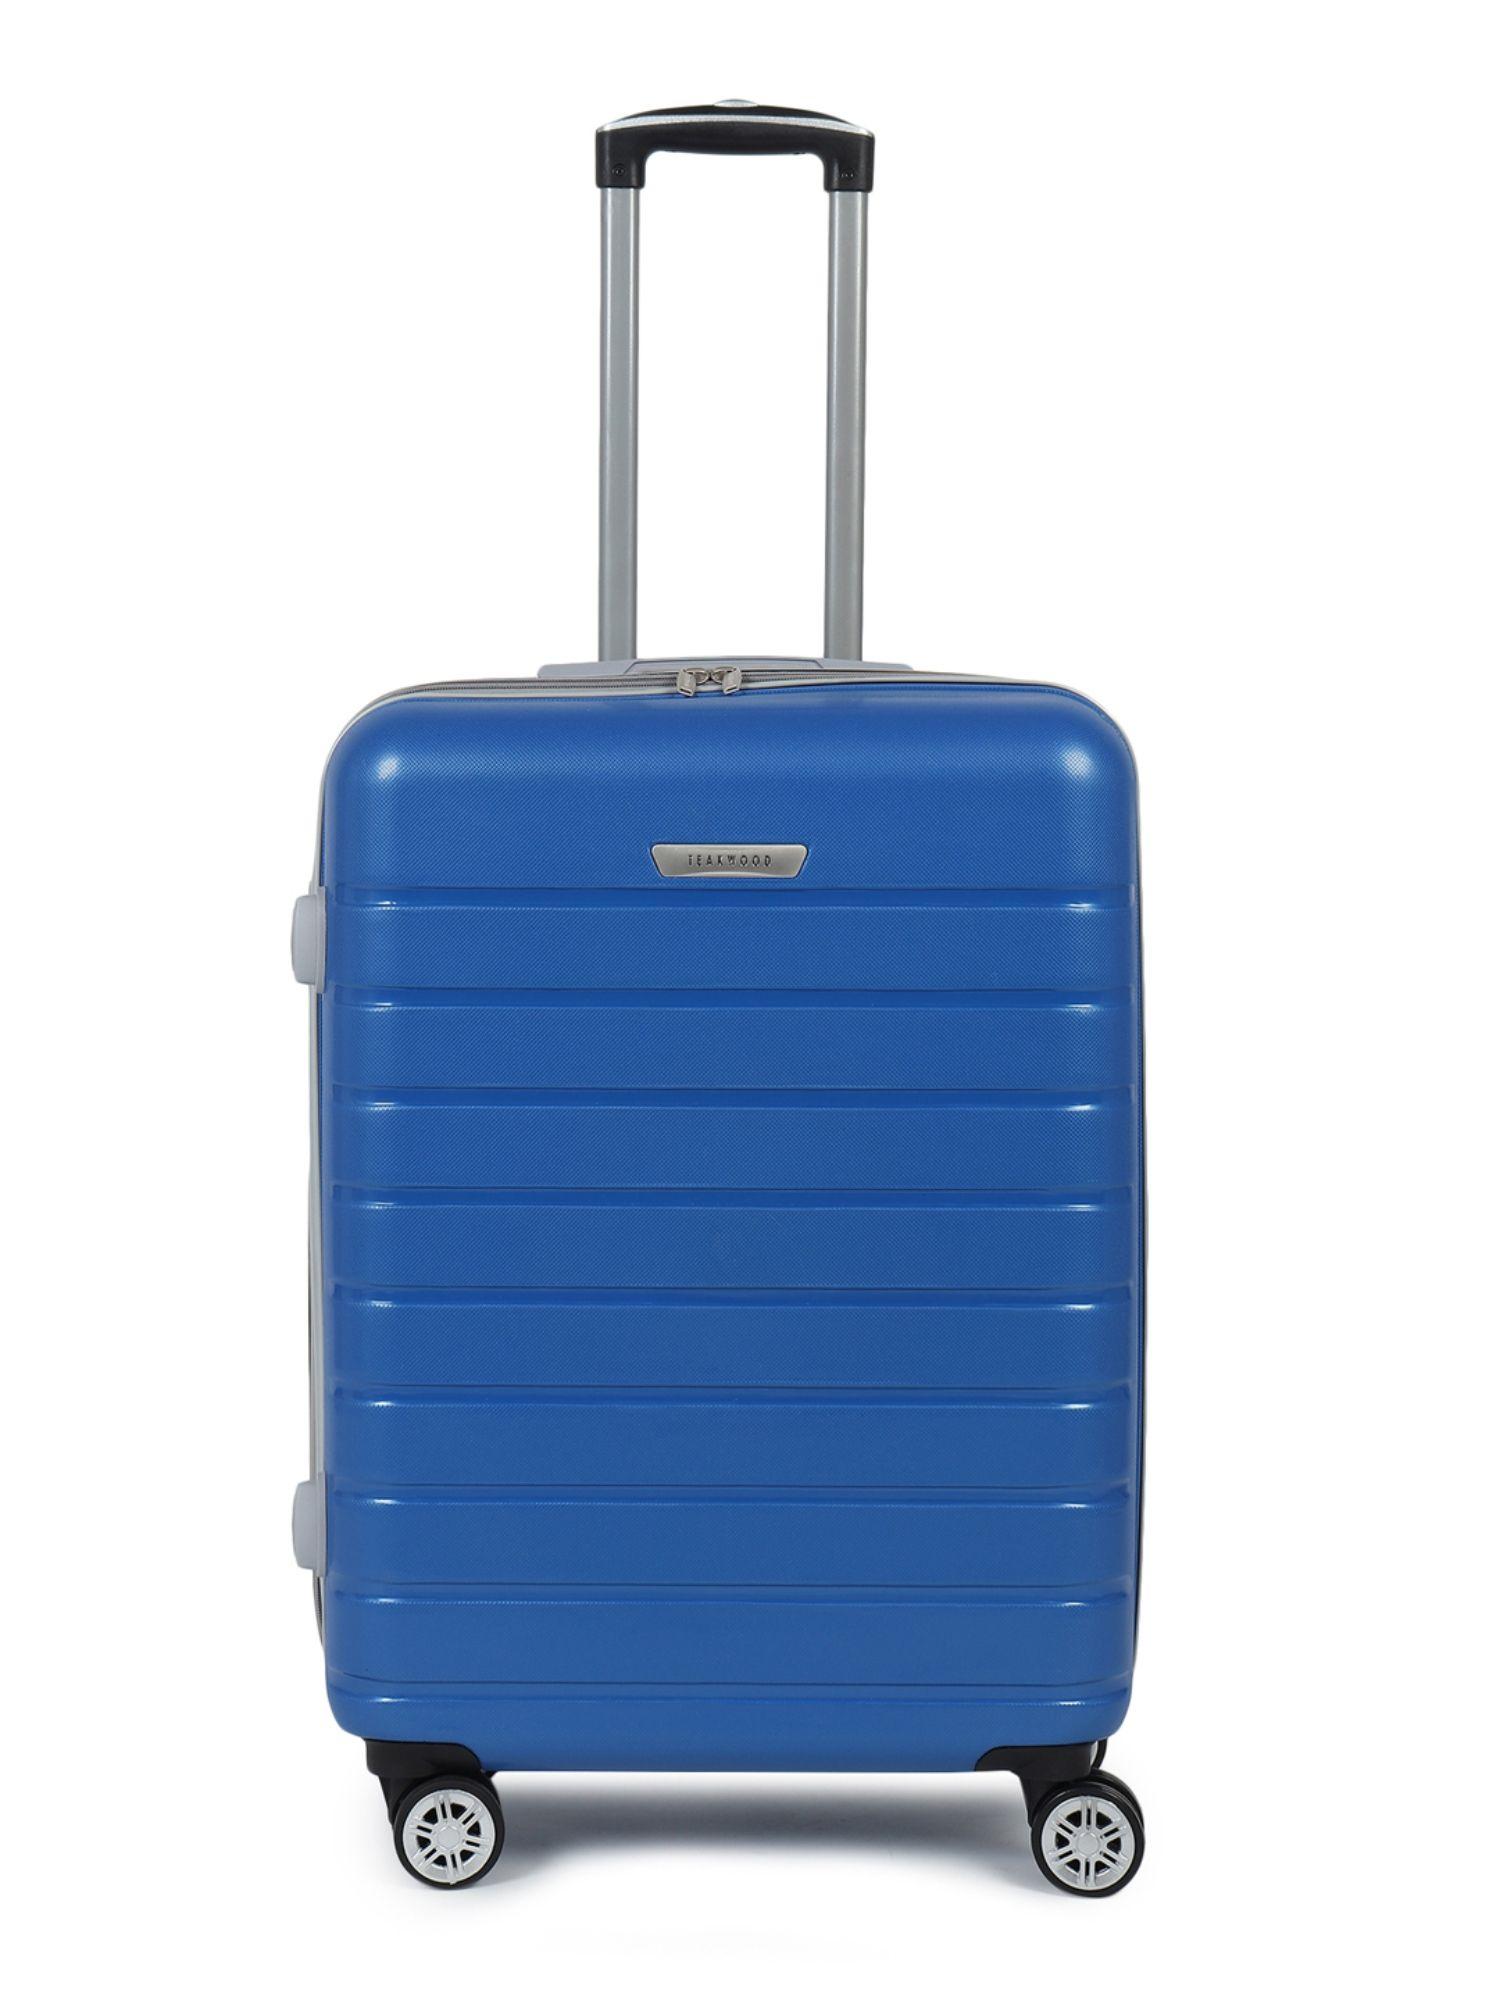 unisex-blue-textured-hard-sided-medium-size-check-in-trolley-bag